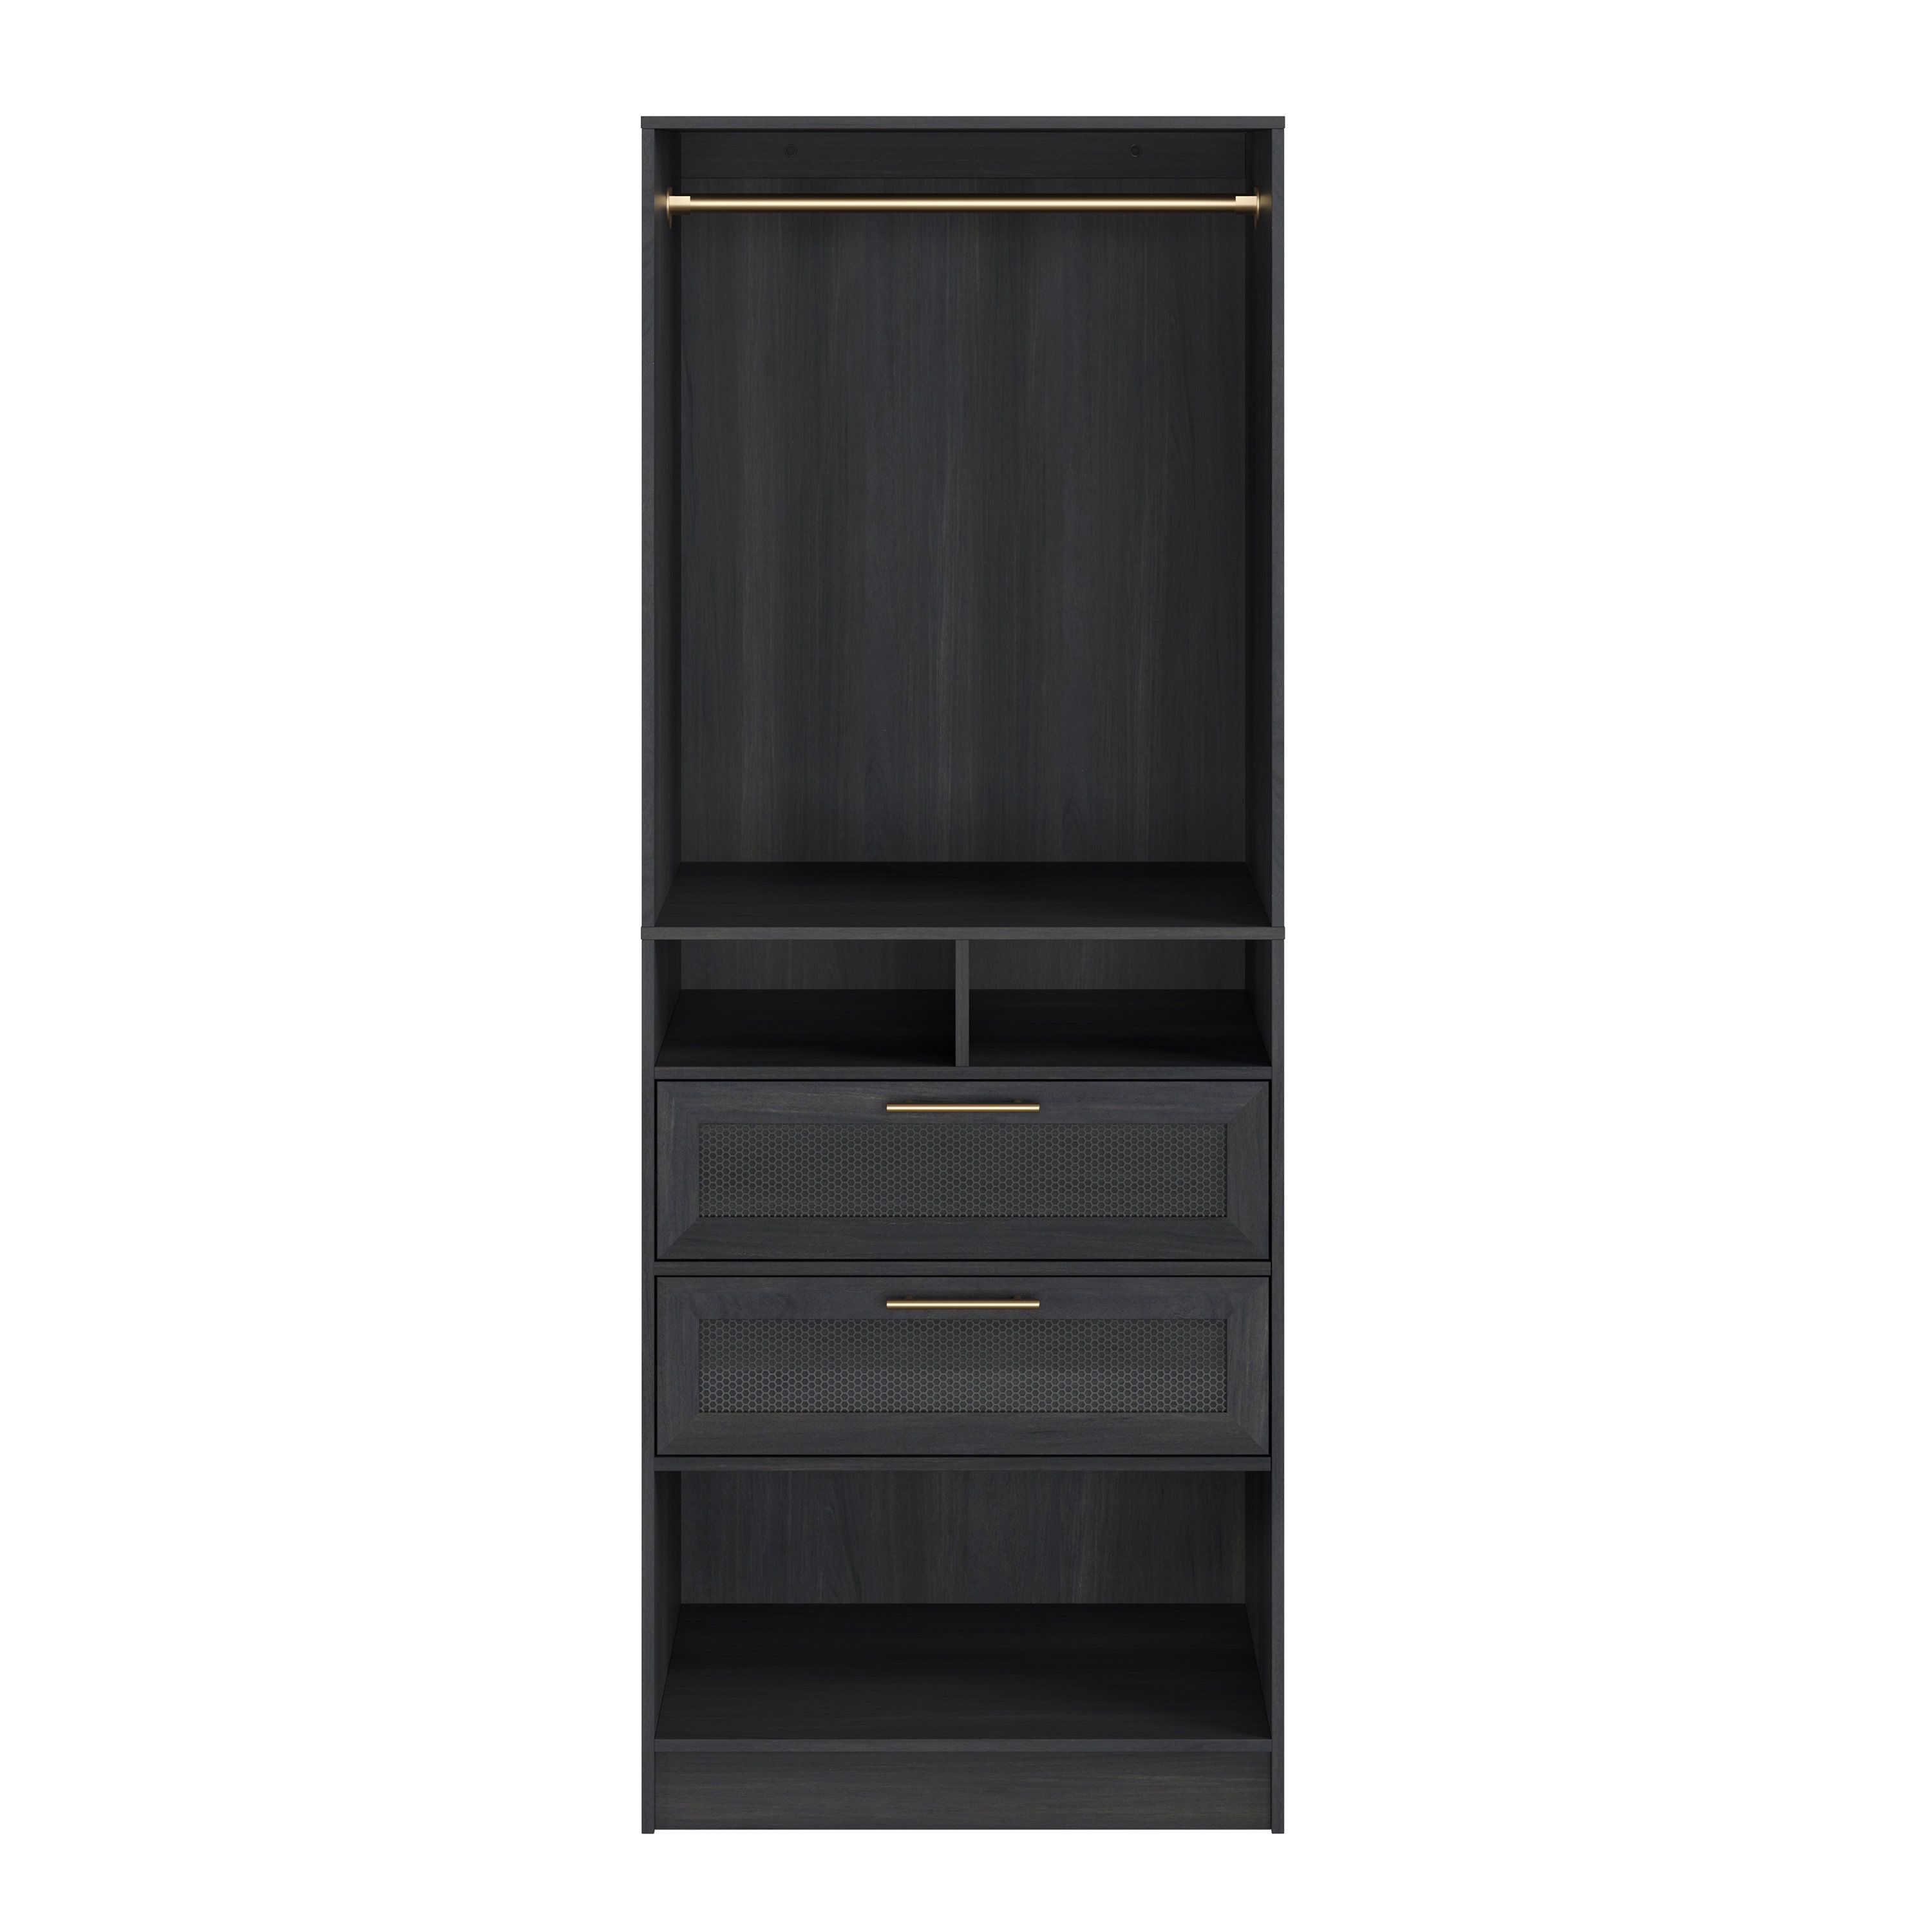 Scott Living Robin 30" Wardrobe Closet With 2 Drawers And 4 Shelves With  Clothes Rod Closet System & Reviews | Wayfair Throughout 2 Separable Wardrobes (View 10 of 20)